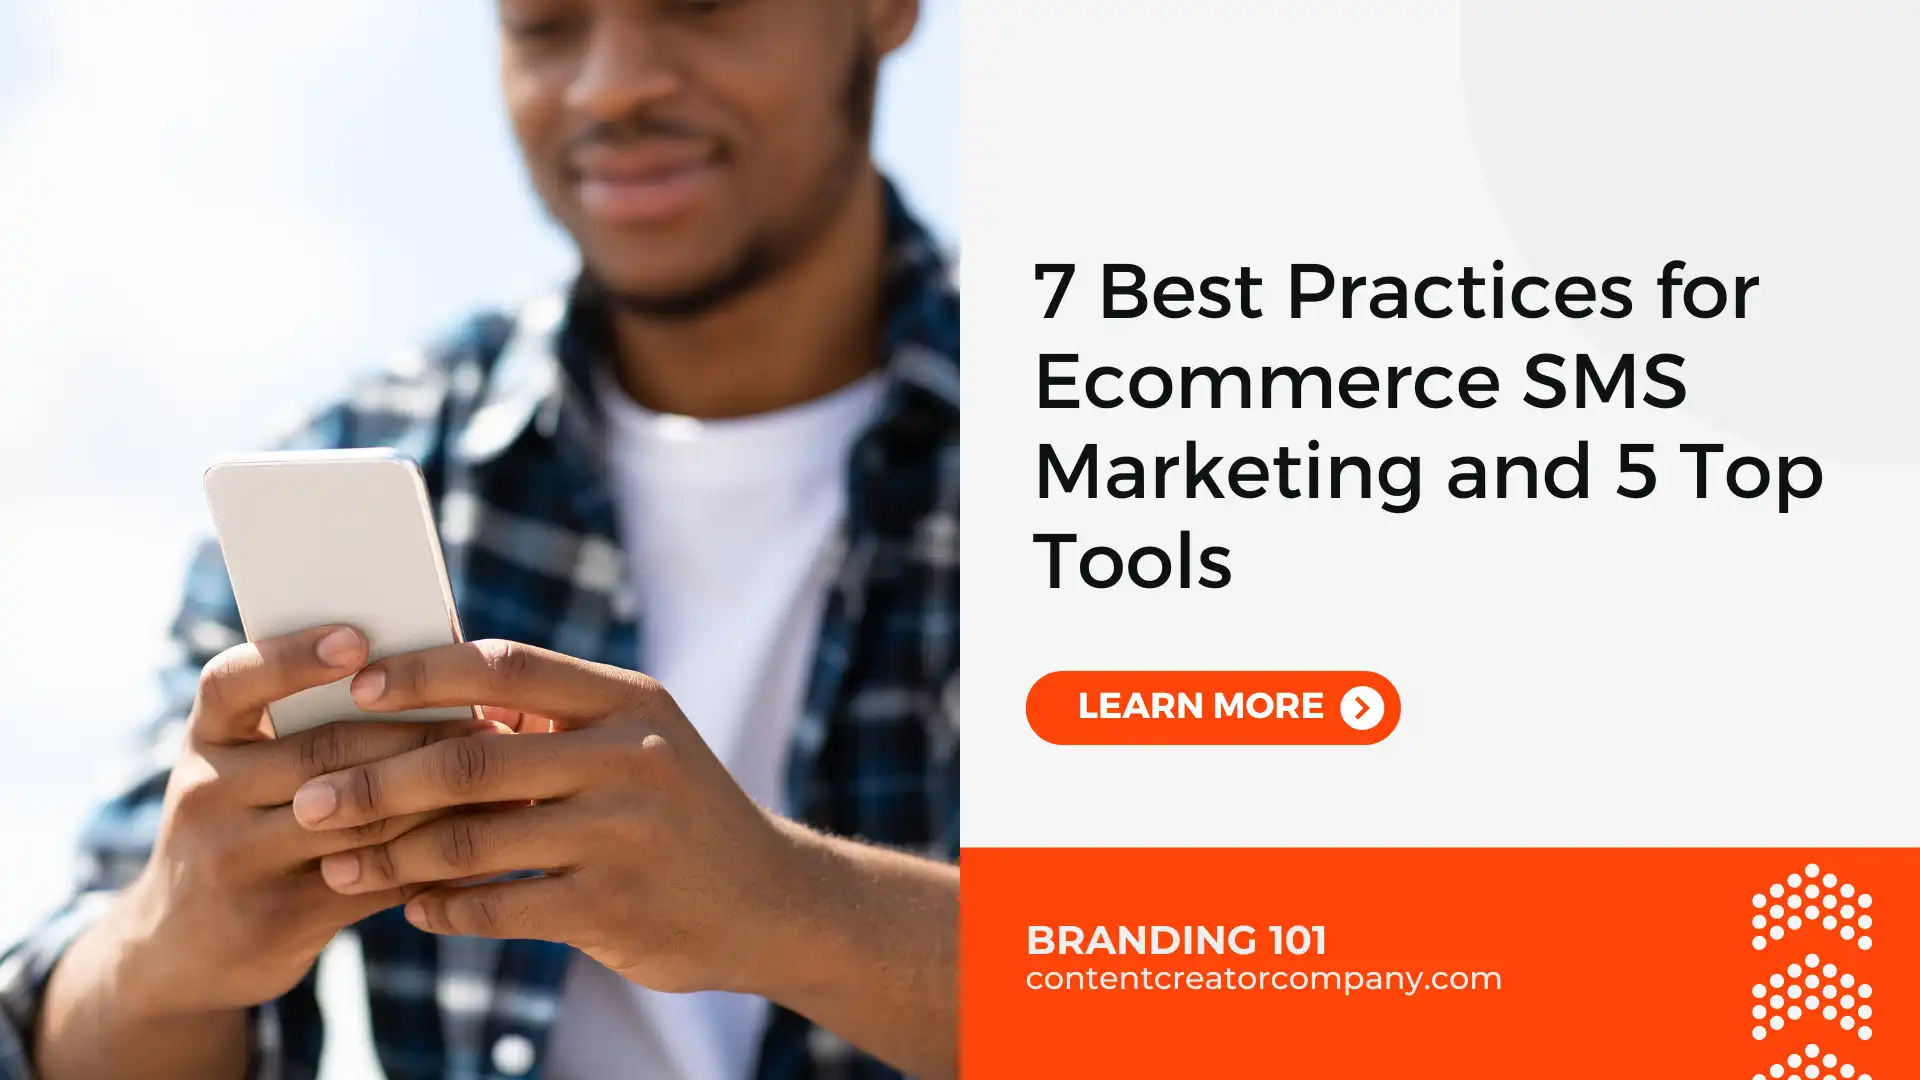 7 Best Practices for Ecommerce SMS Marketing and 5 Top Tools